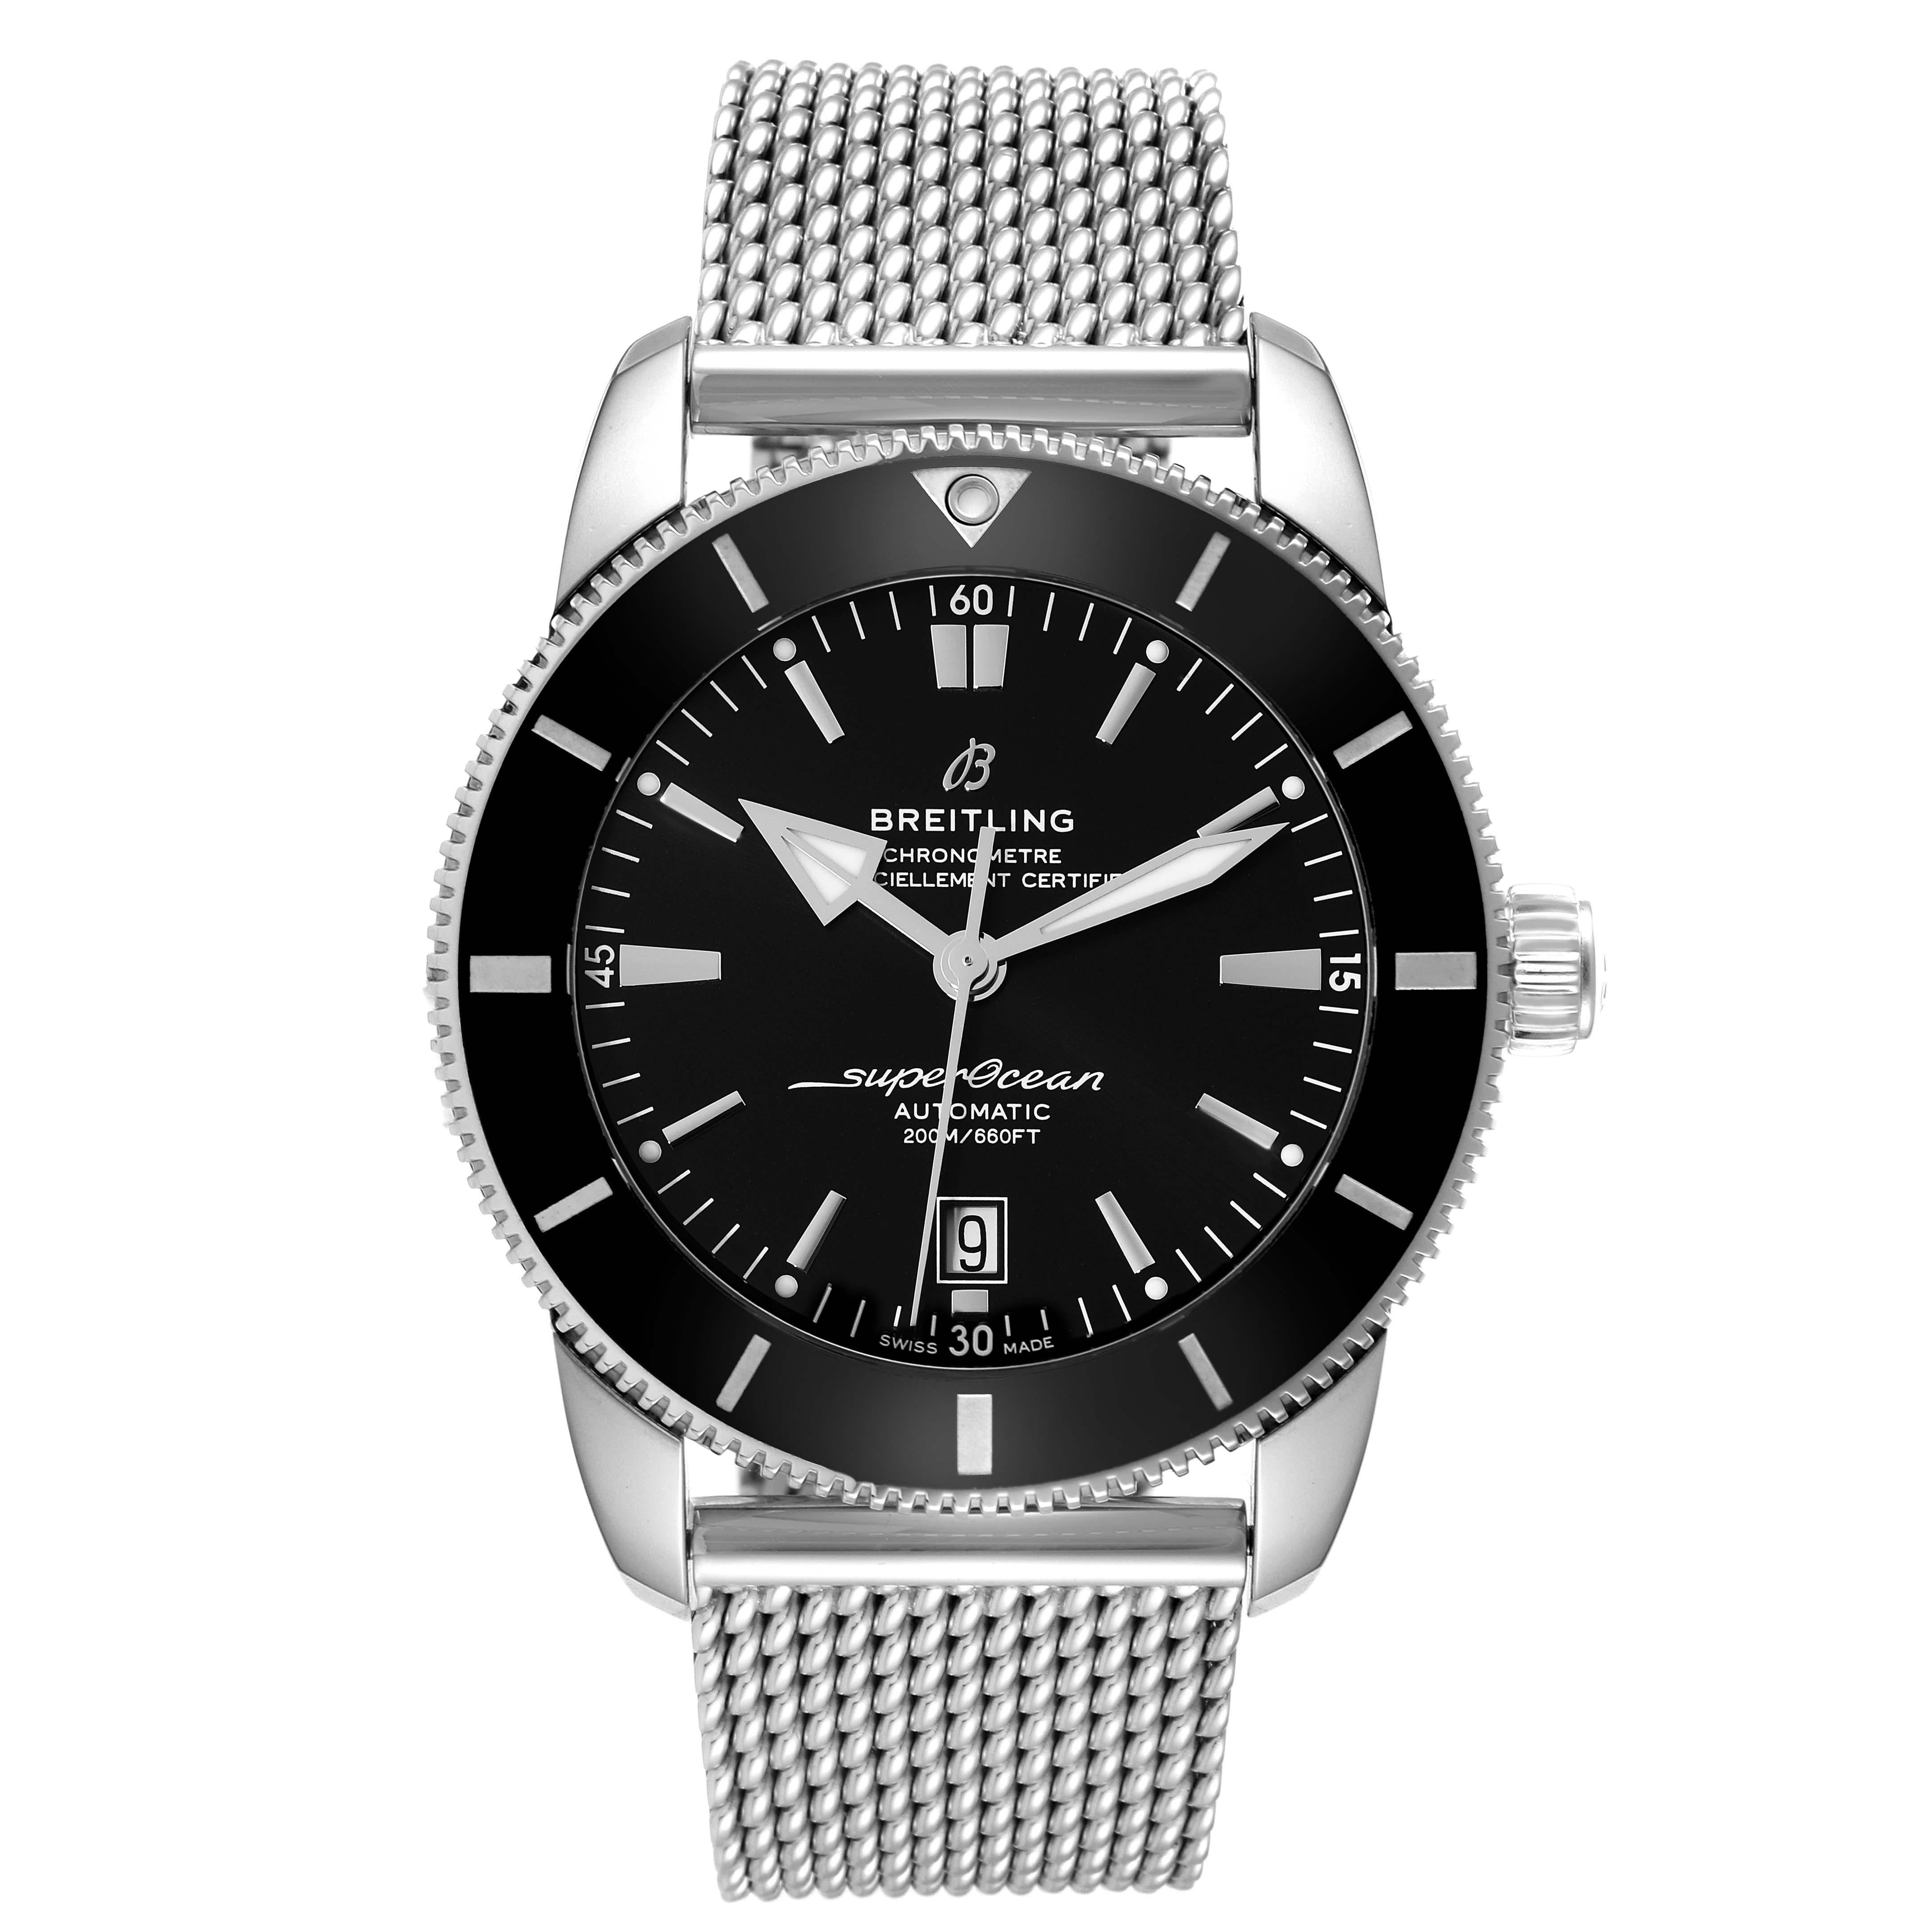 Breitling Superocean Heritage 46 Black Dial Steel Mens Watch AB2020 Box Card. Automatic self-winding movement. Stainless steel case 46 mm in diameter. Stainless steel screwed-down crown. Black unidirectional rotating bezel. Scratch resistant